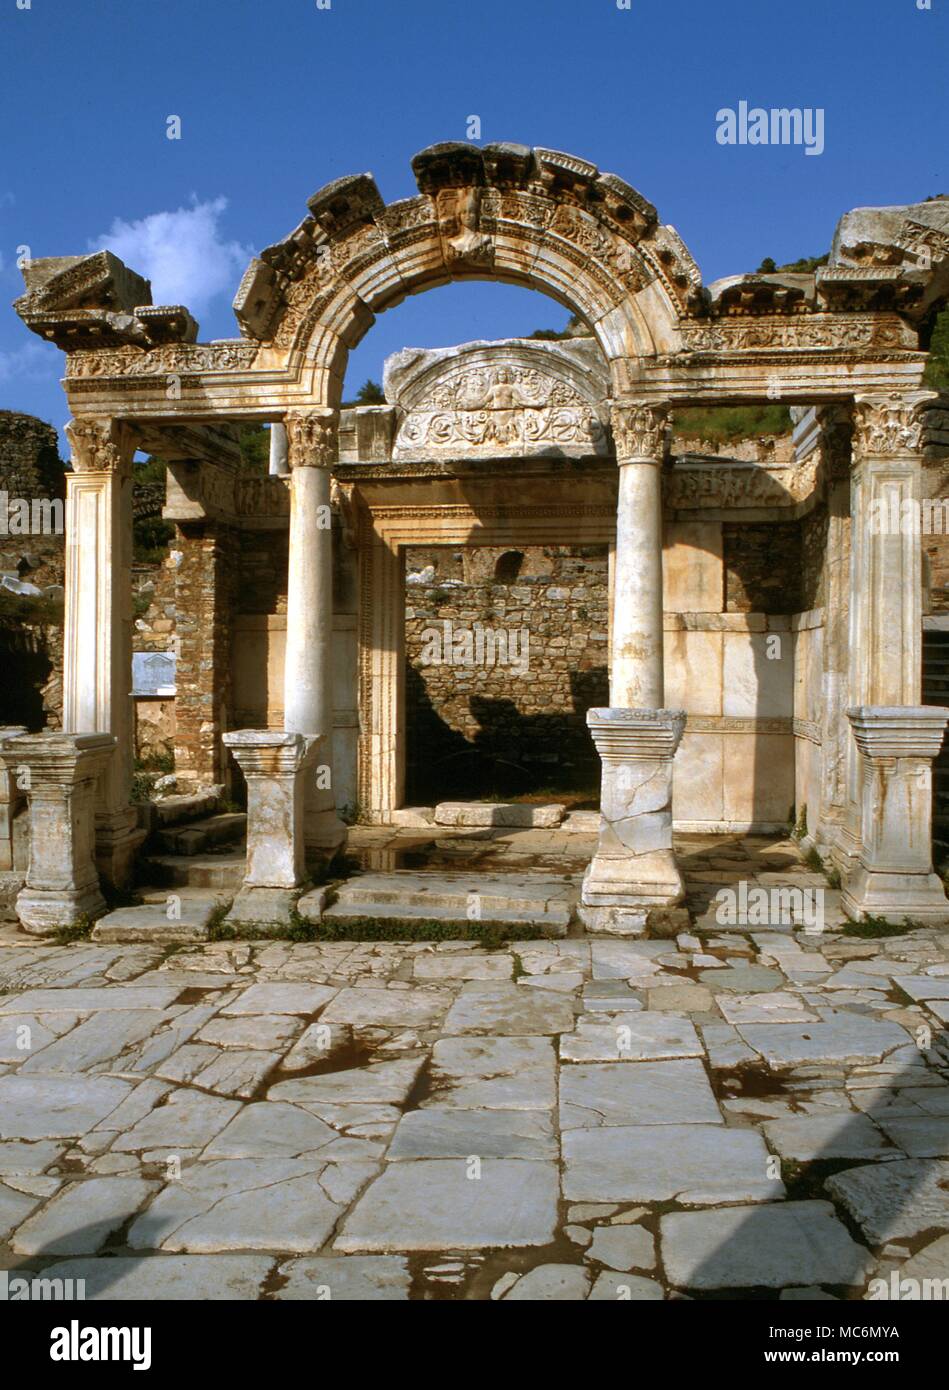 Remains of the so-called Temple of Hadrian on the sacred way at Ephesus, Turkey. Stock Photo